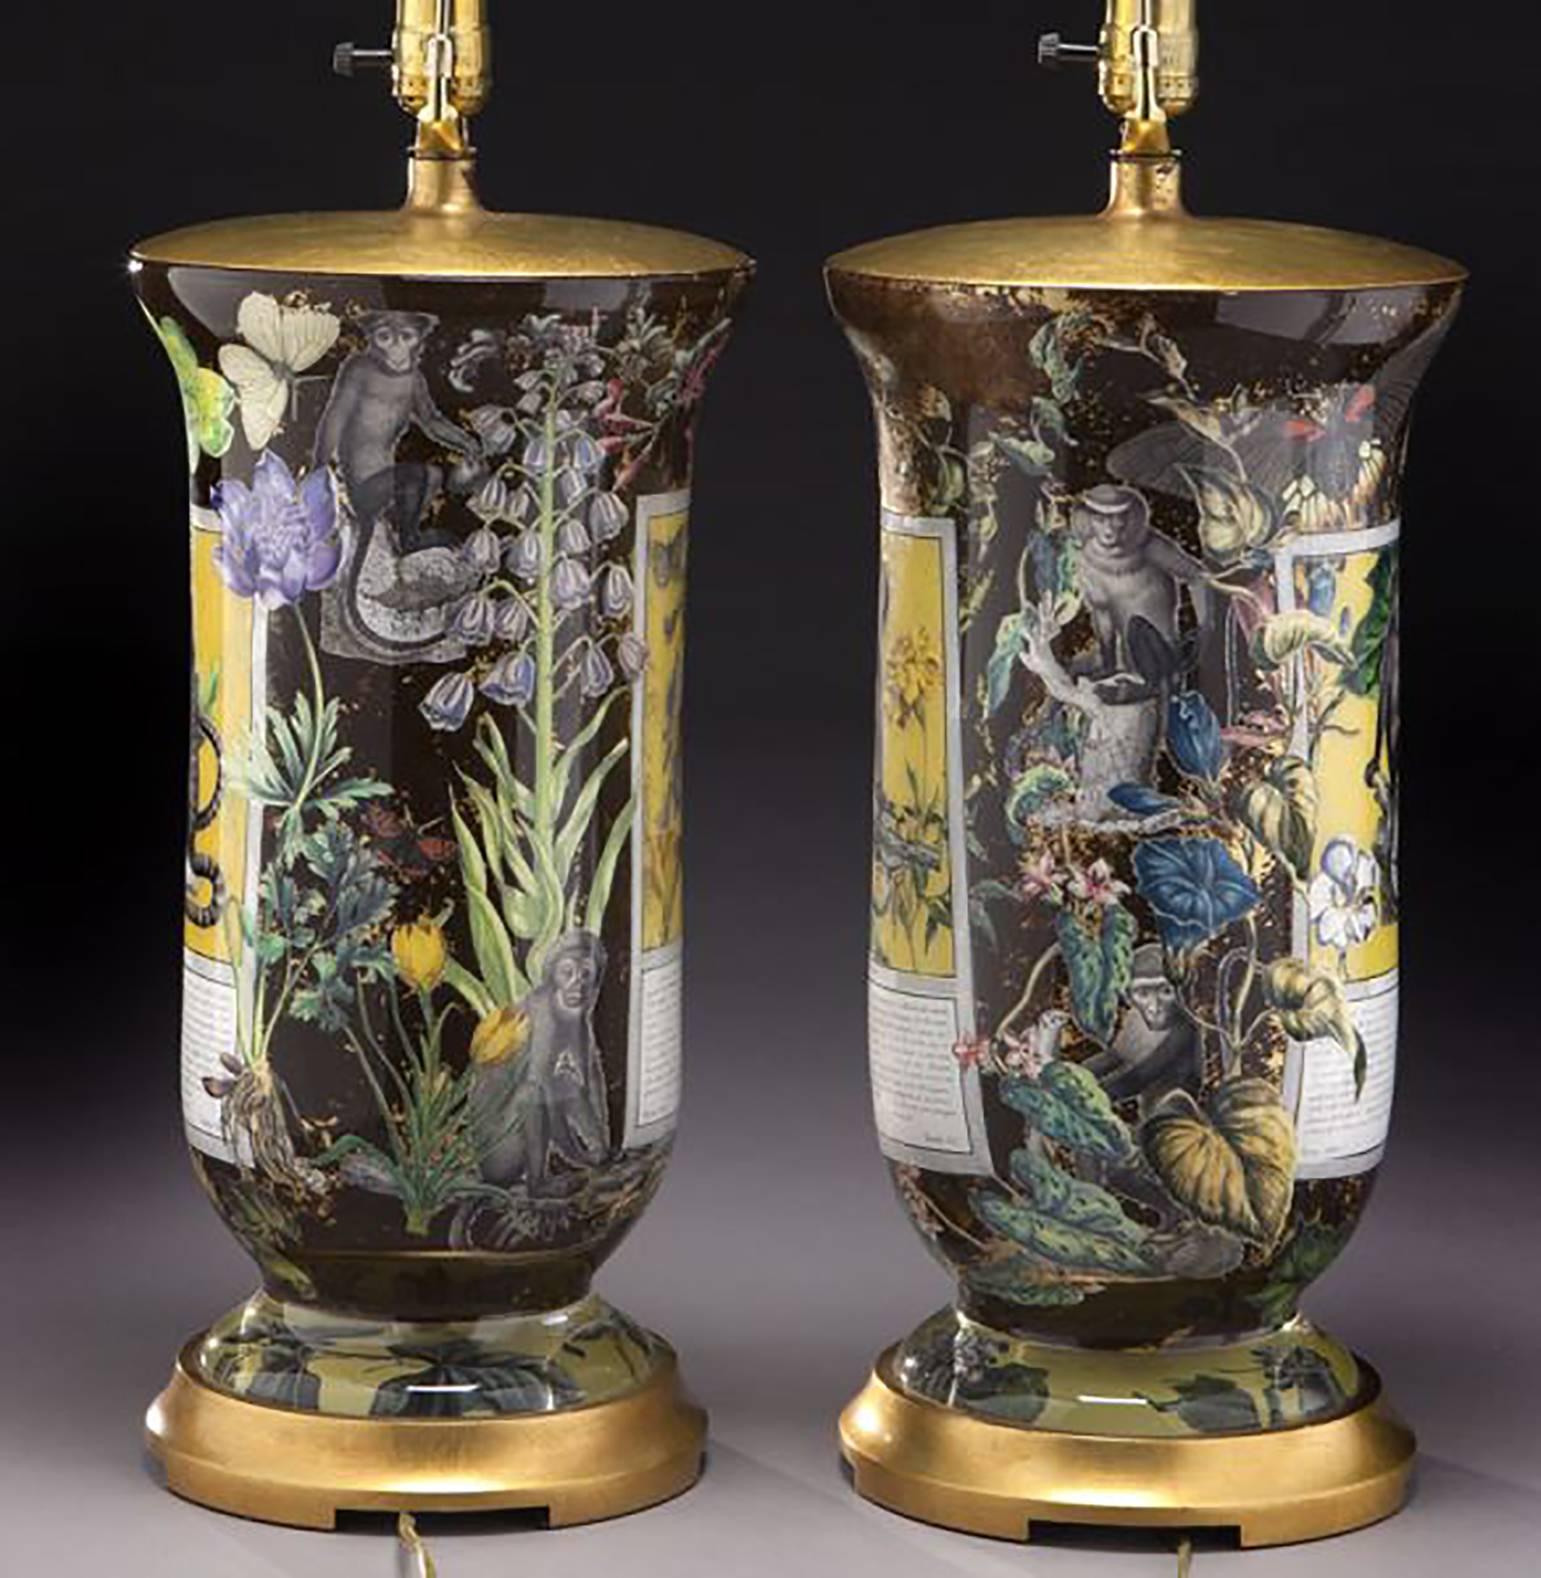 Pair of glass table lamps beautifully reverse decorated by hand with scenes of marmosets, flowers and butterflies on gilt metal plinths, with pleated shades.